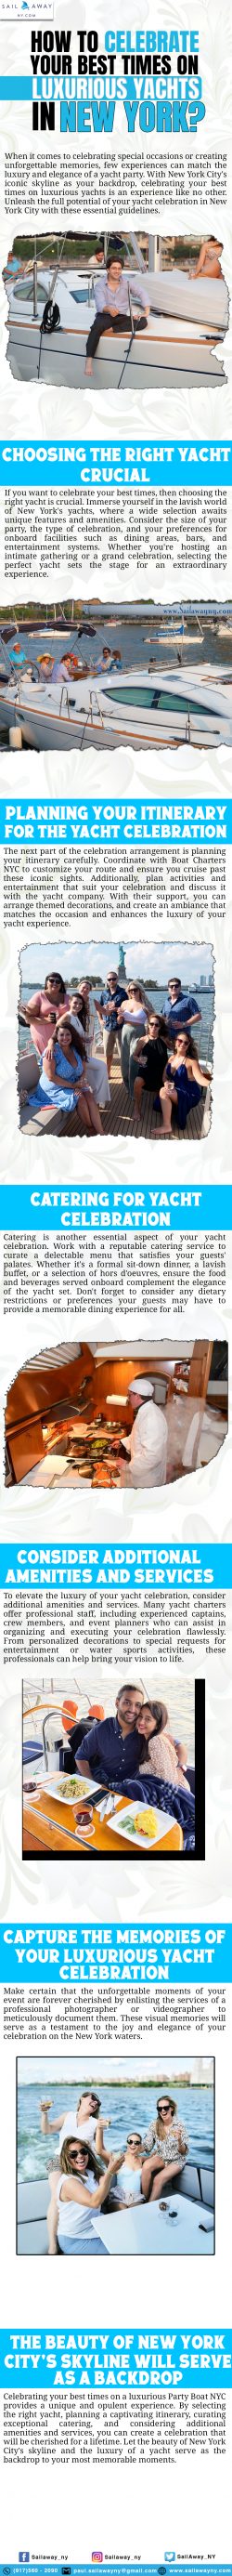 HOW TO CELEBRATE YOUR BEST TIMES ON LUXURIOUS YACHTS IN NEW YORK?